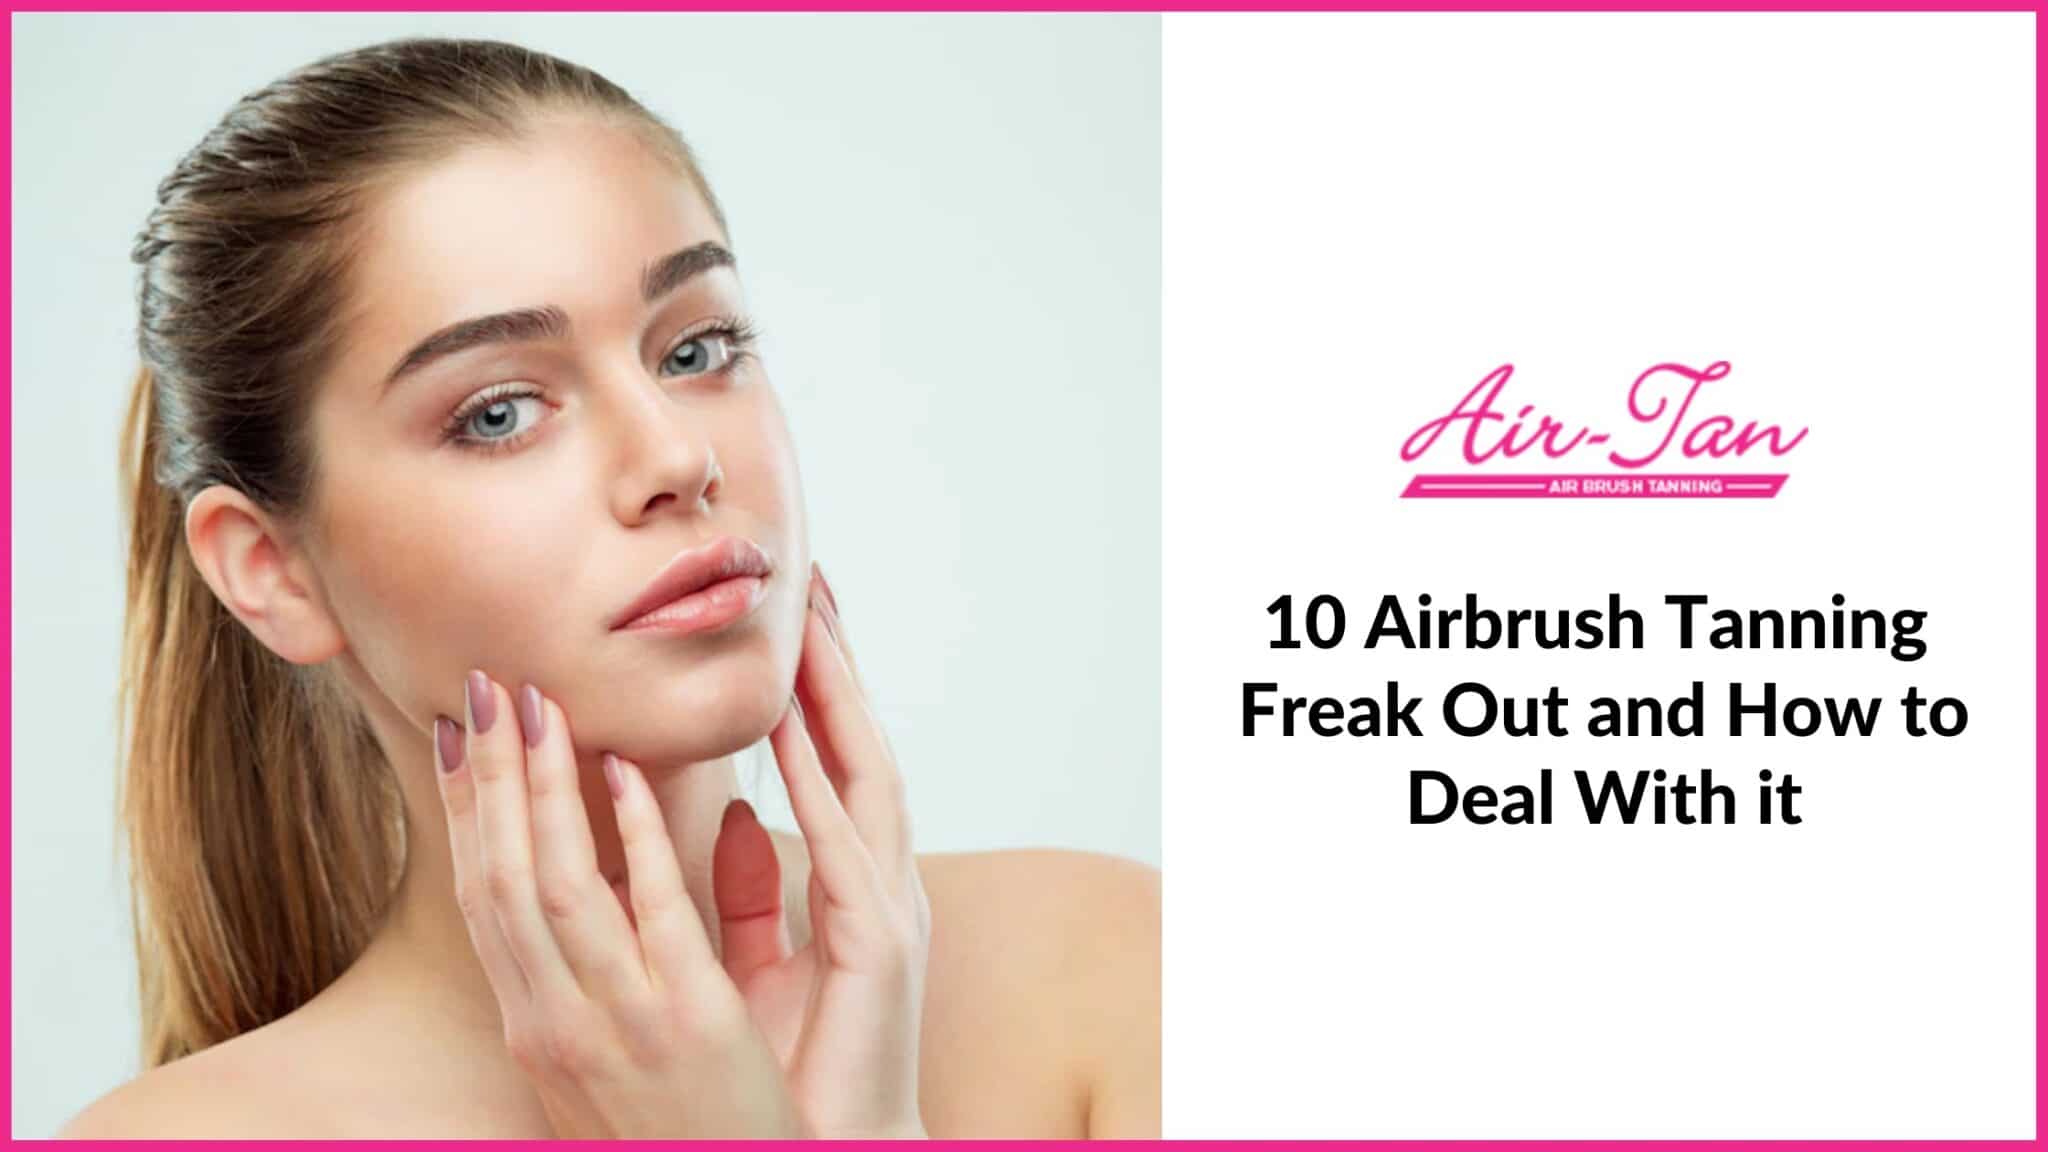 10 Airbrush tanning Freak Out and How to Deal With it (1)-9e3db151